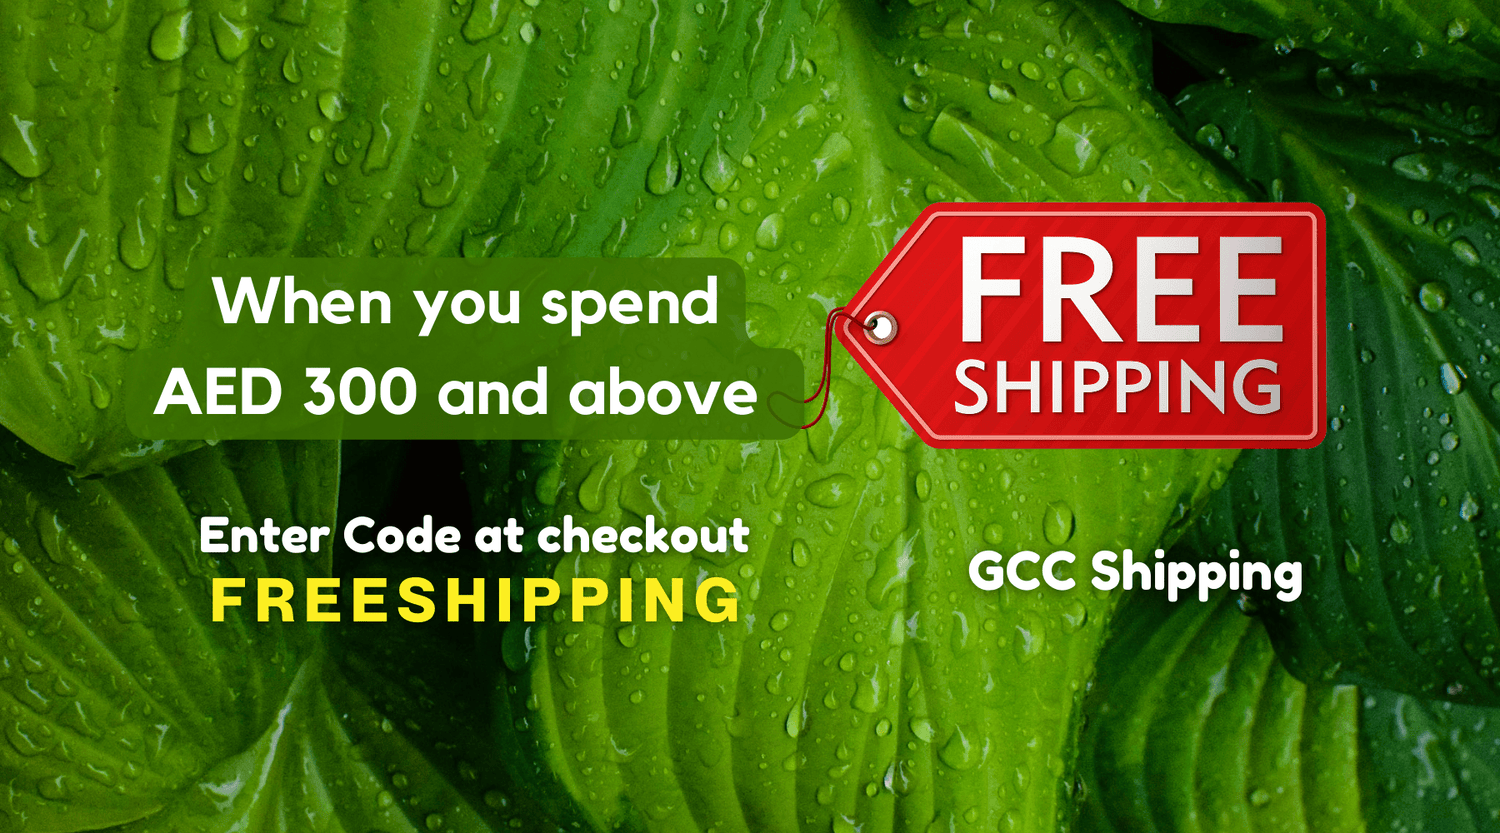 Free GCC Shipping for Just Gentle Products when you spend AED 300 and above